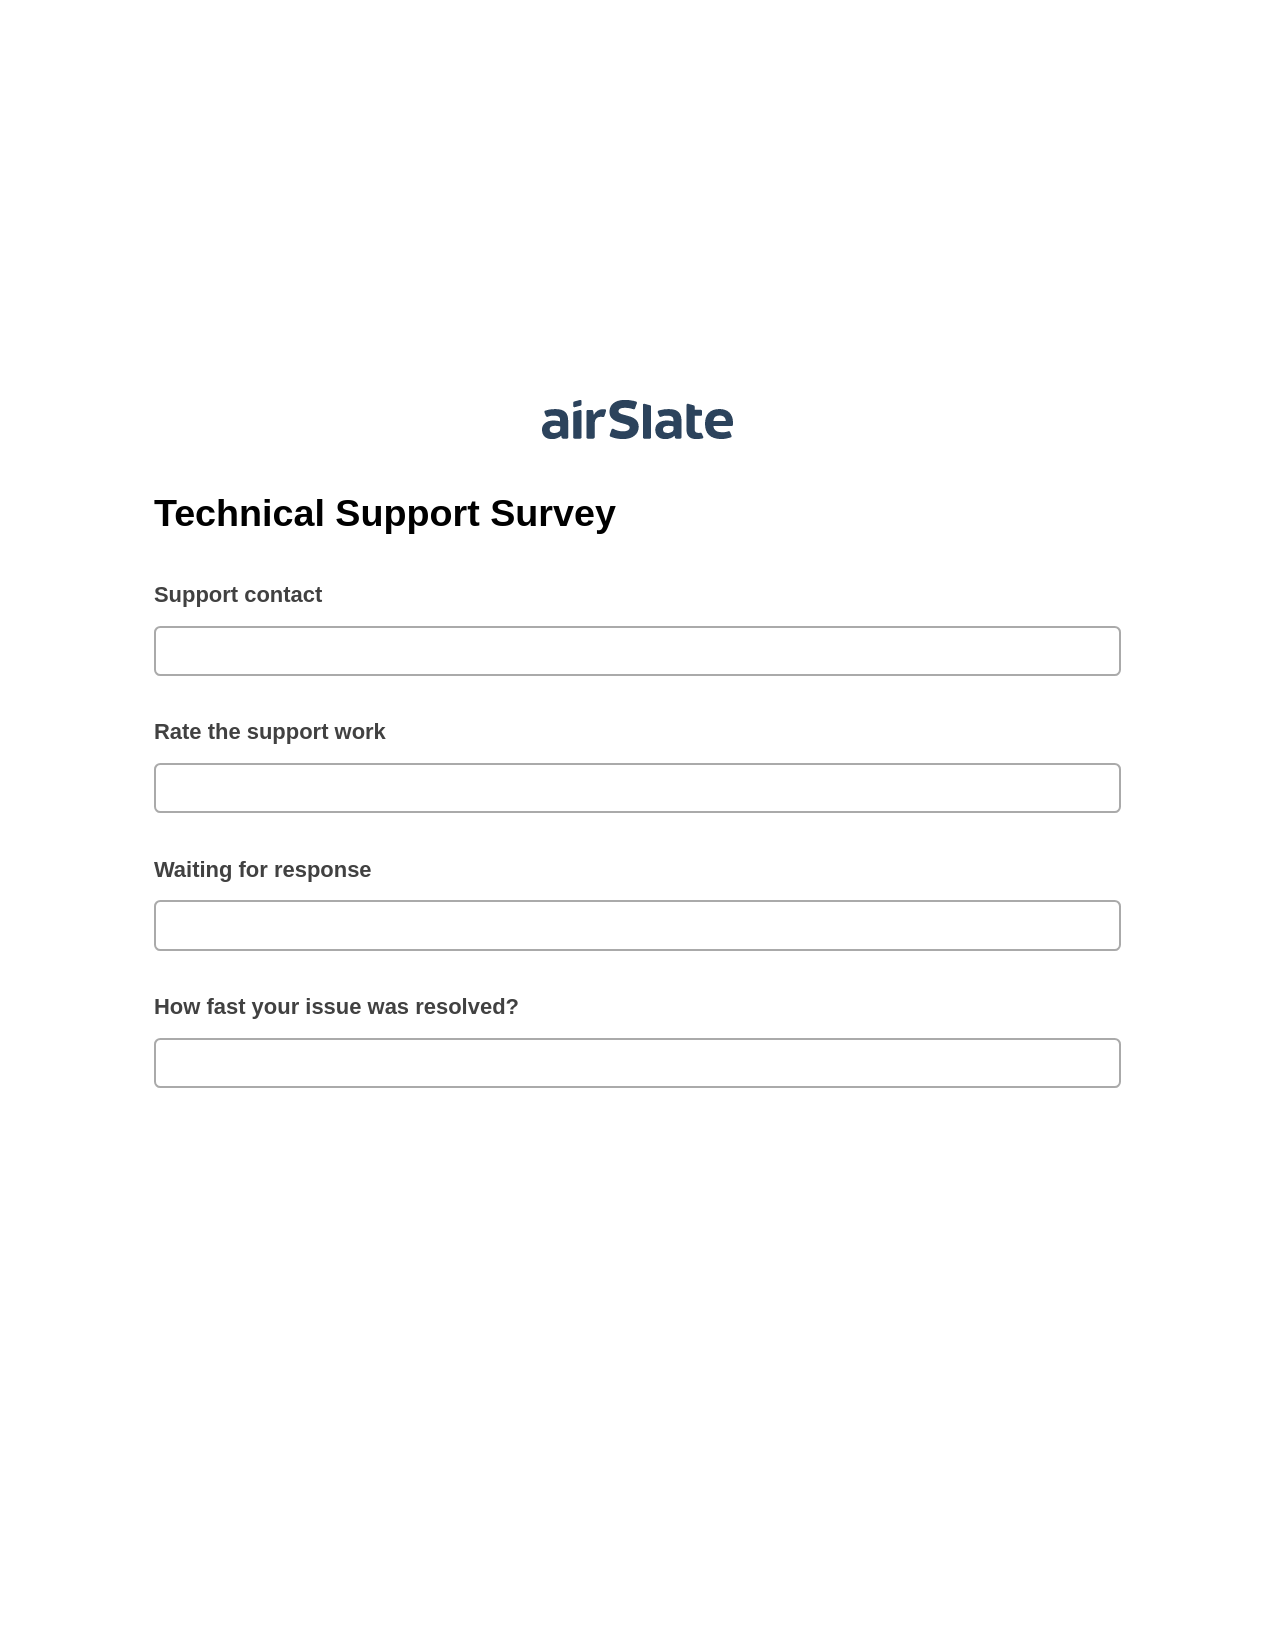 Multirole Technical Support Survey Prefill from NetSuite records, Remove Tags From Slate Bot, Export to Salesforce Record Bot